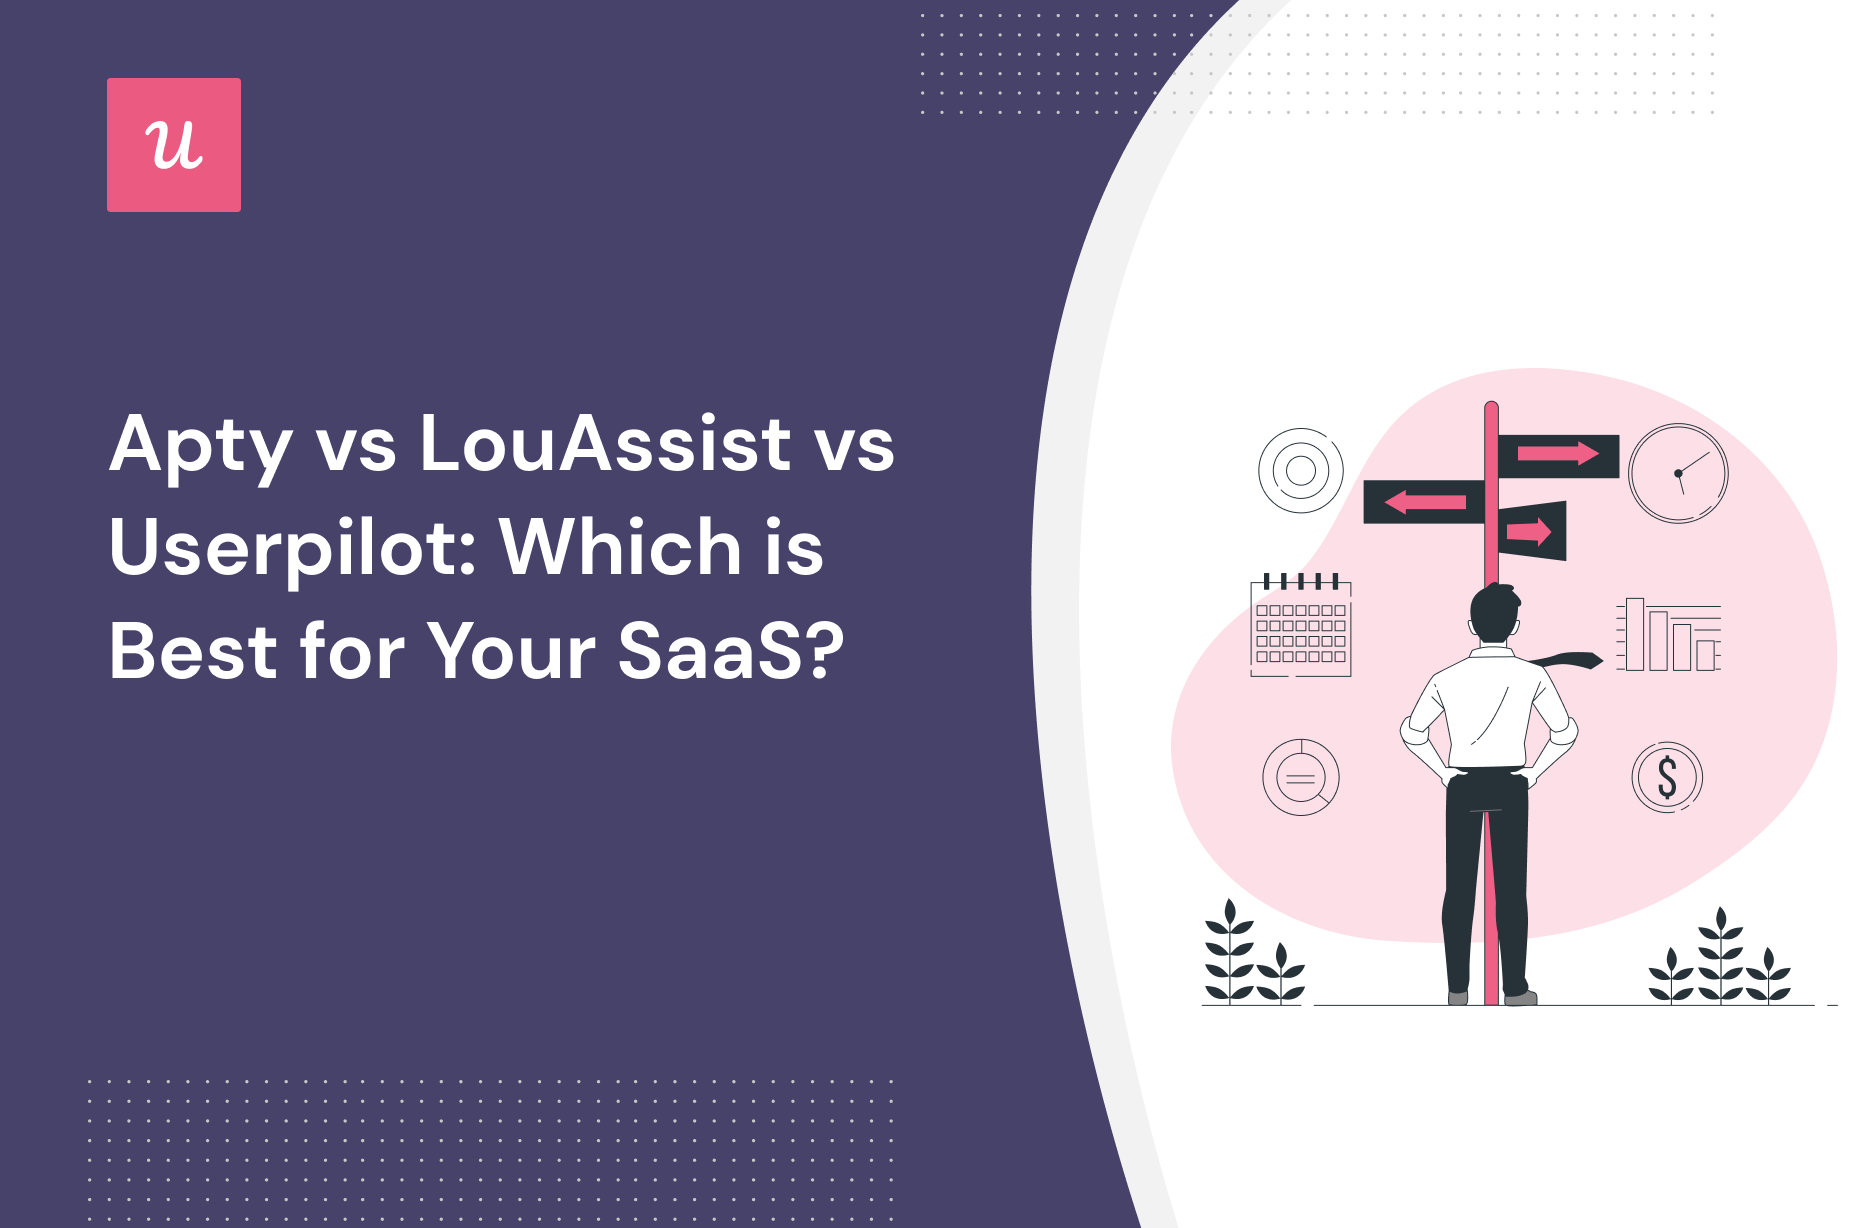 Apty vs LouAssist vs Userpilot: Which is Best for Your SaaS?